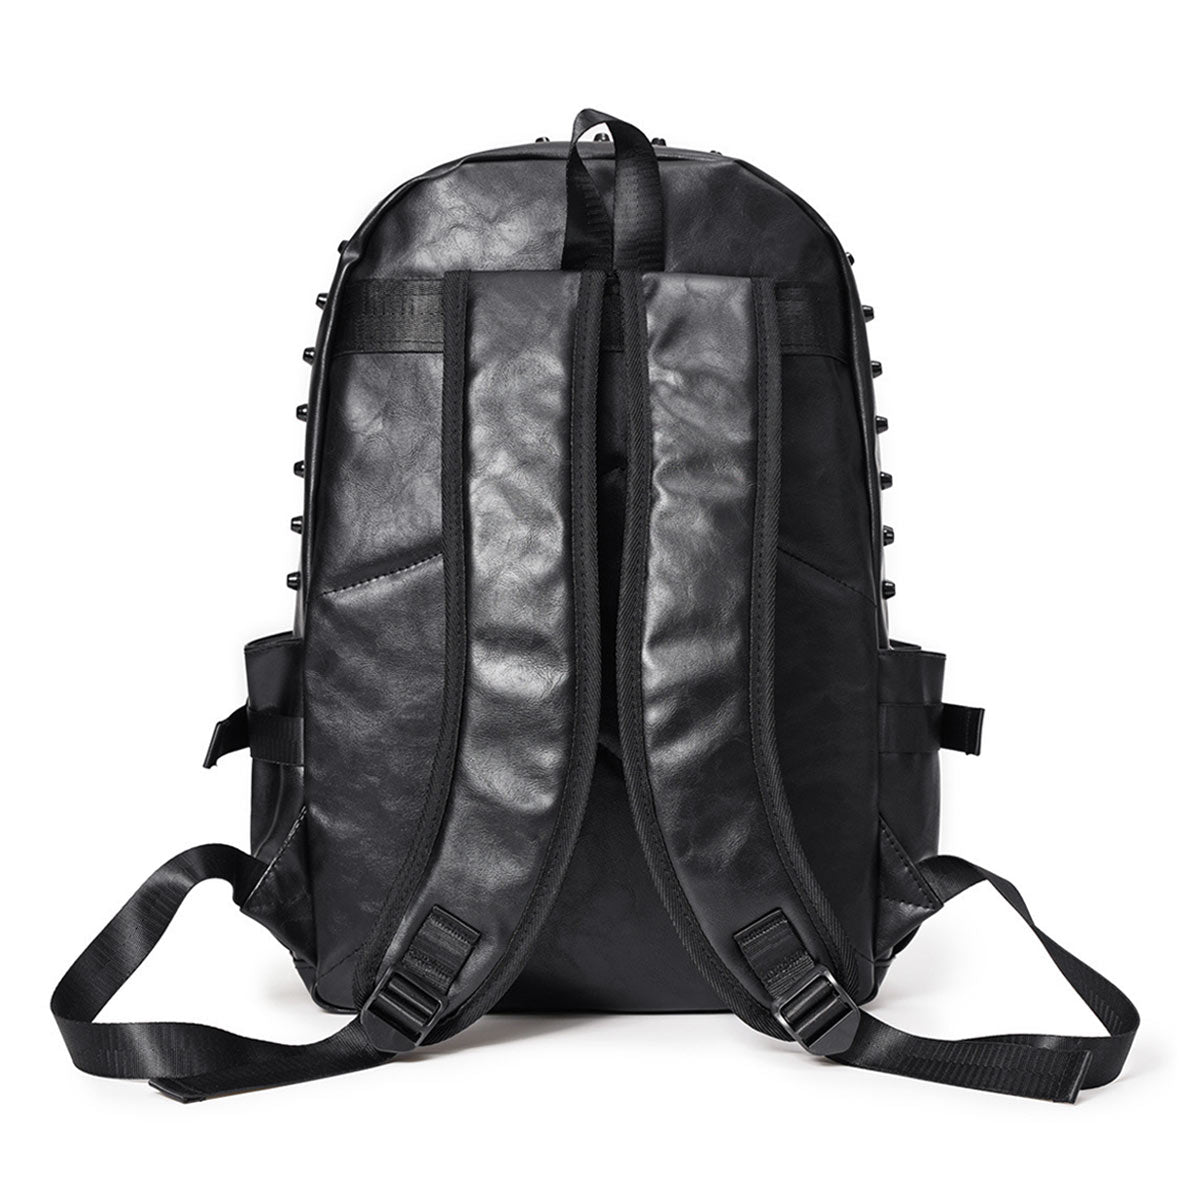 Punk Style Accessory - Black Laptop Backpack